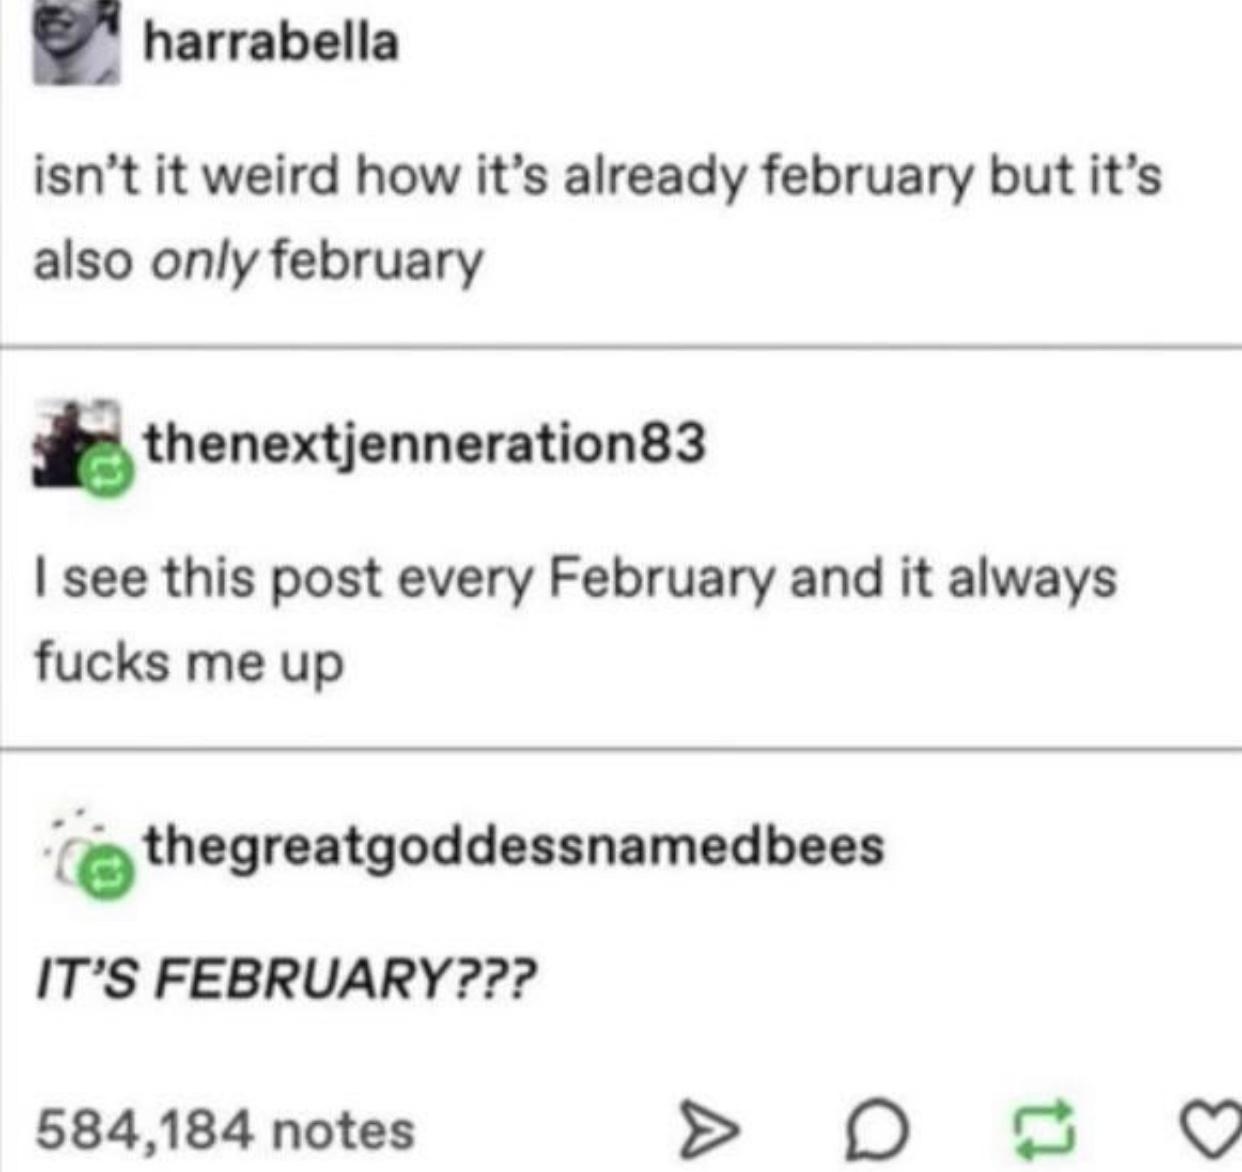 diagram - harrabella isn't it weird how it's already february but it's also only february thenextjenneration83 I see this post every February and it always fucks me up thegreatgoddessnamedbees It'S February??? 584,184 notes A 17